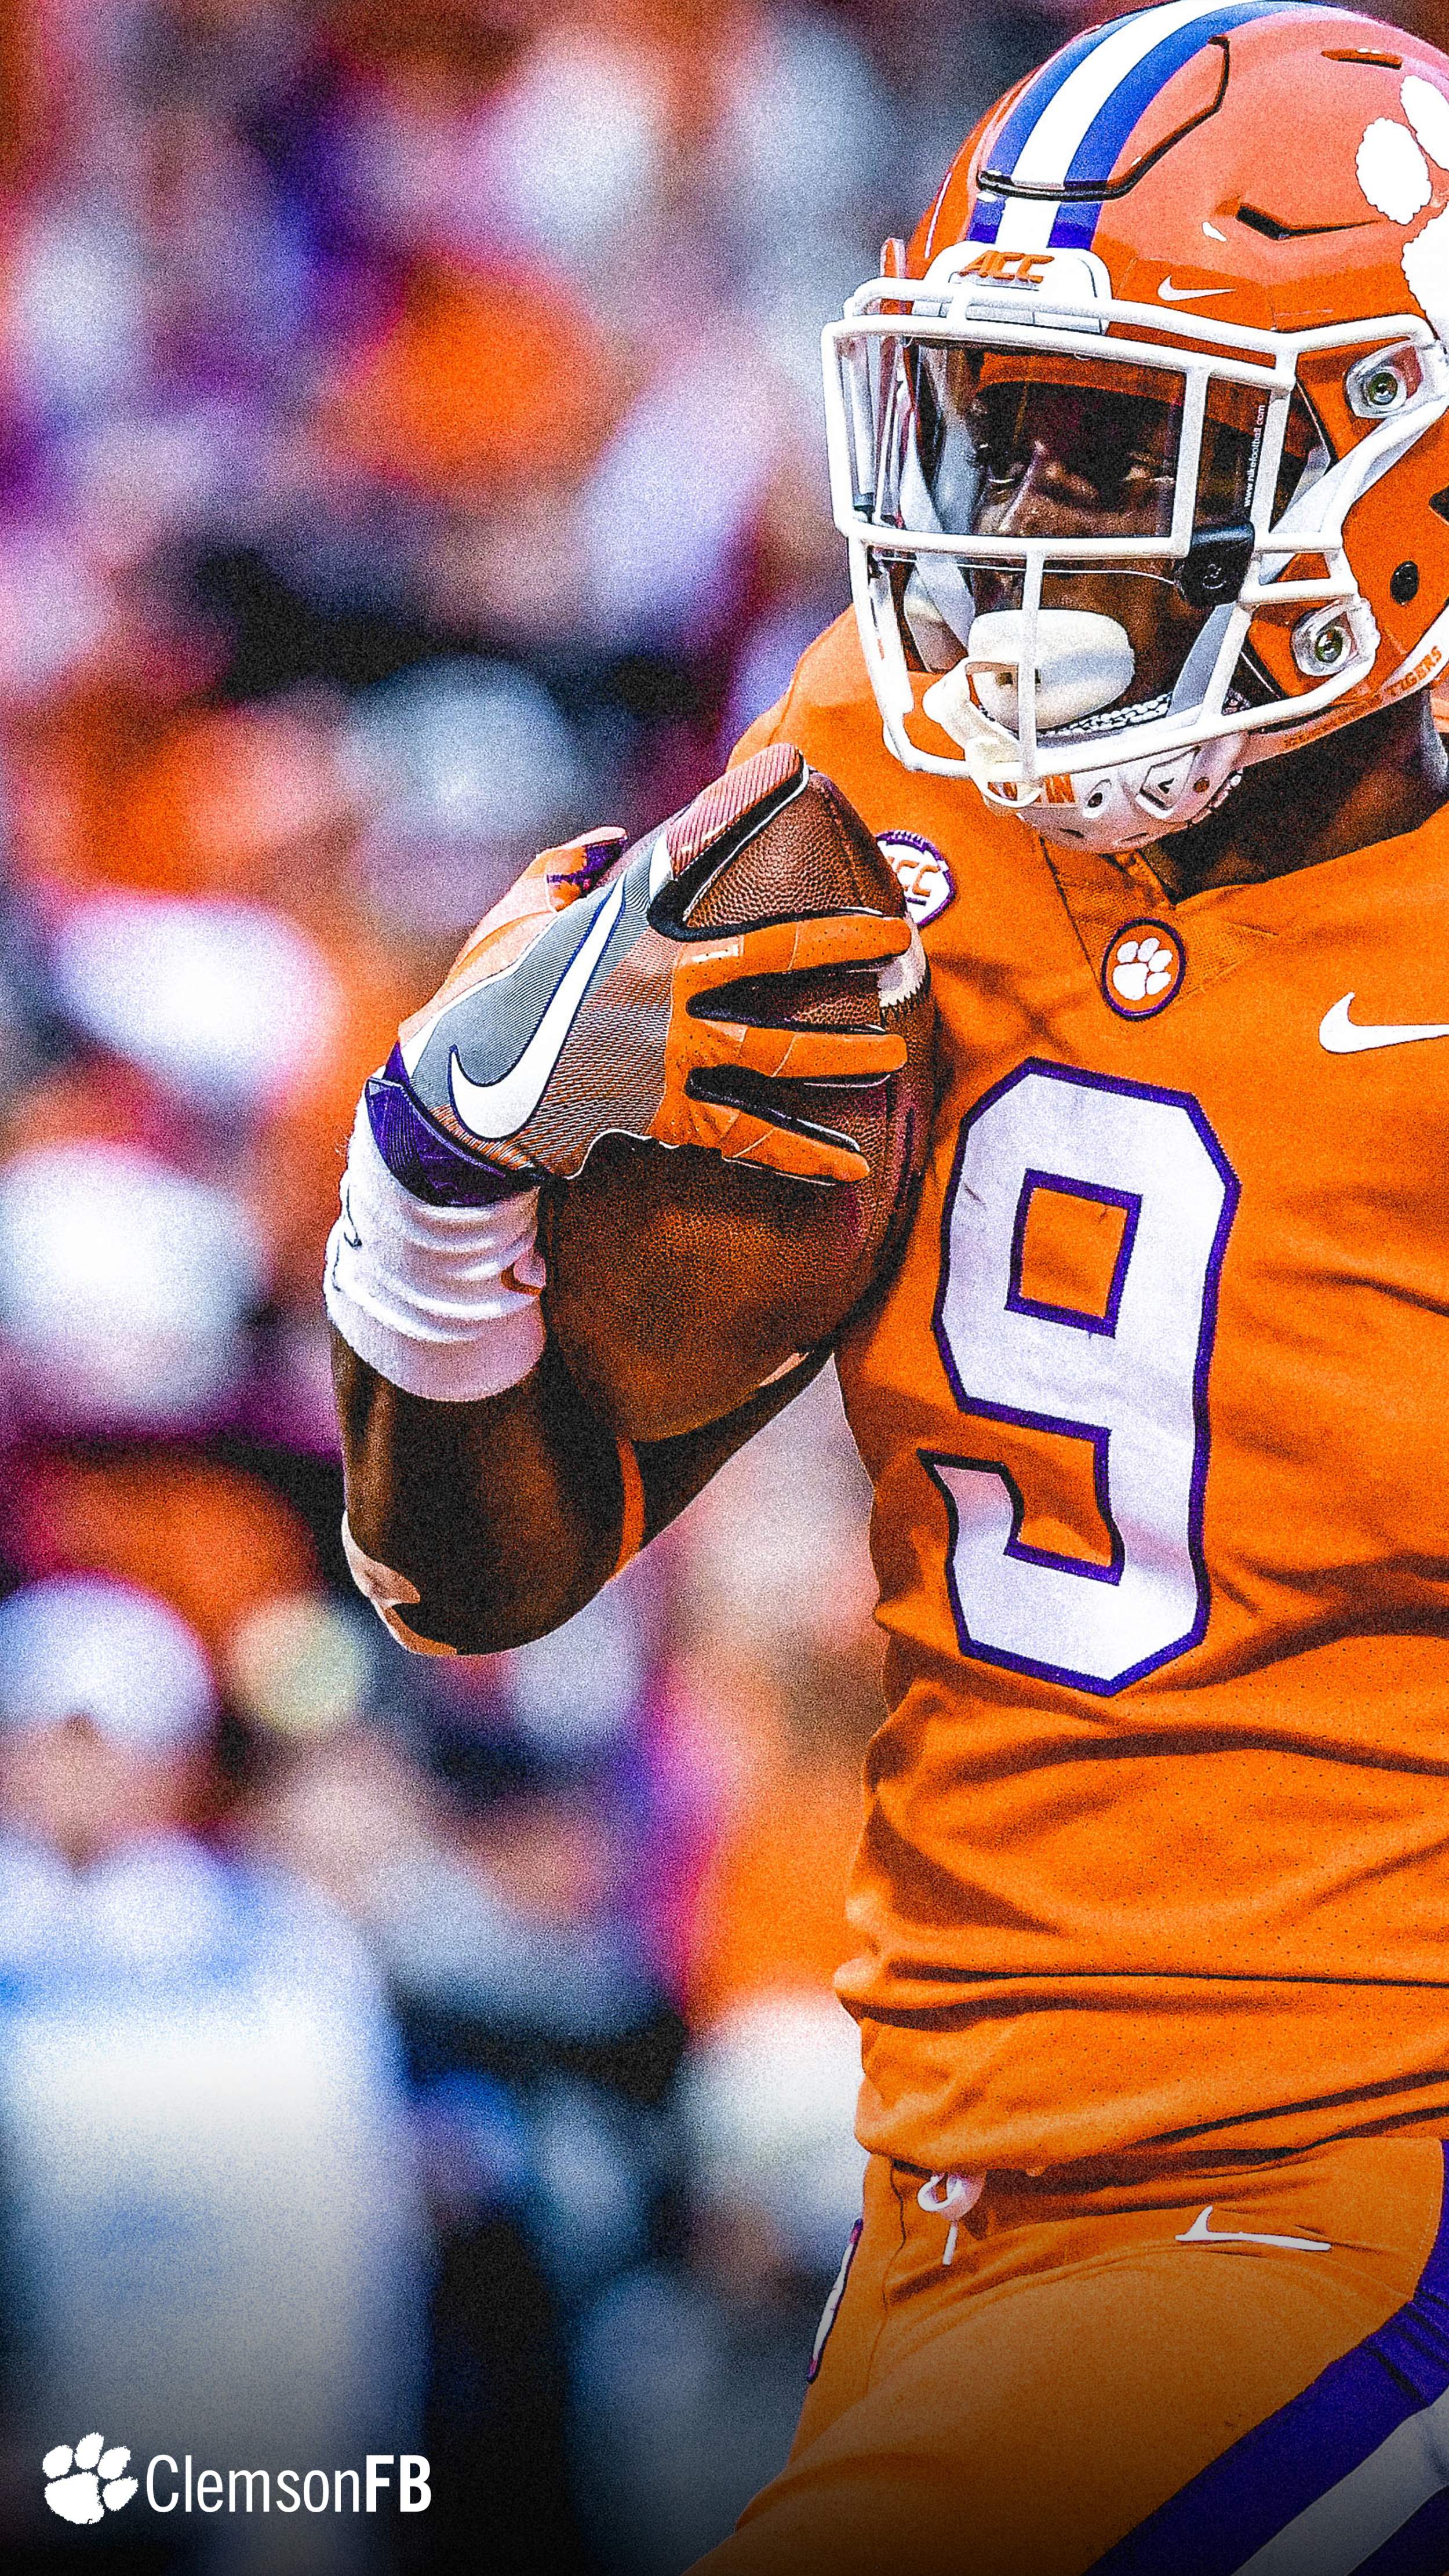 Clemson Football  New 567 phone wallpaper for you  tap  save photo  go to camera roll to select then use as wallpaper  Facebook